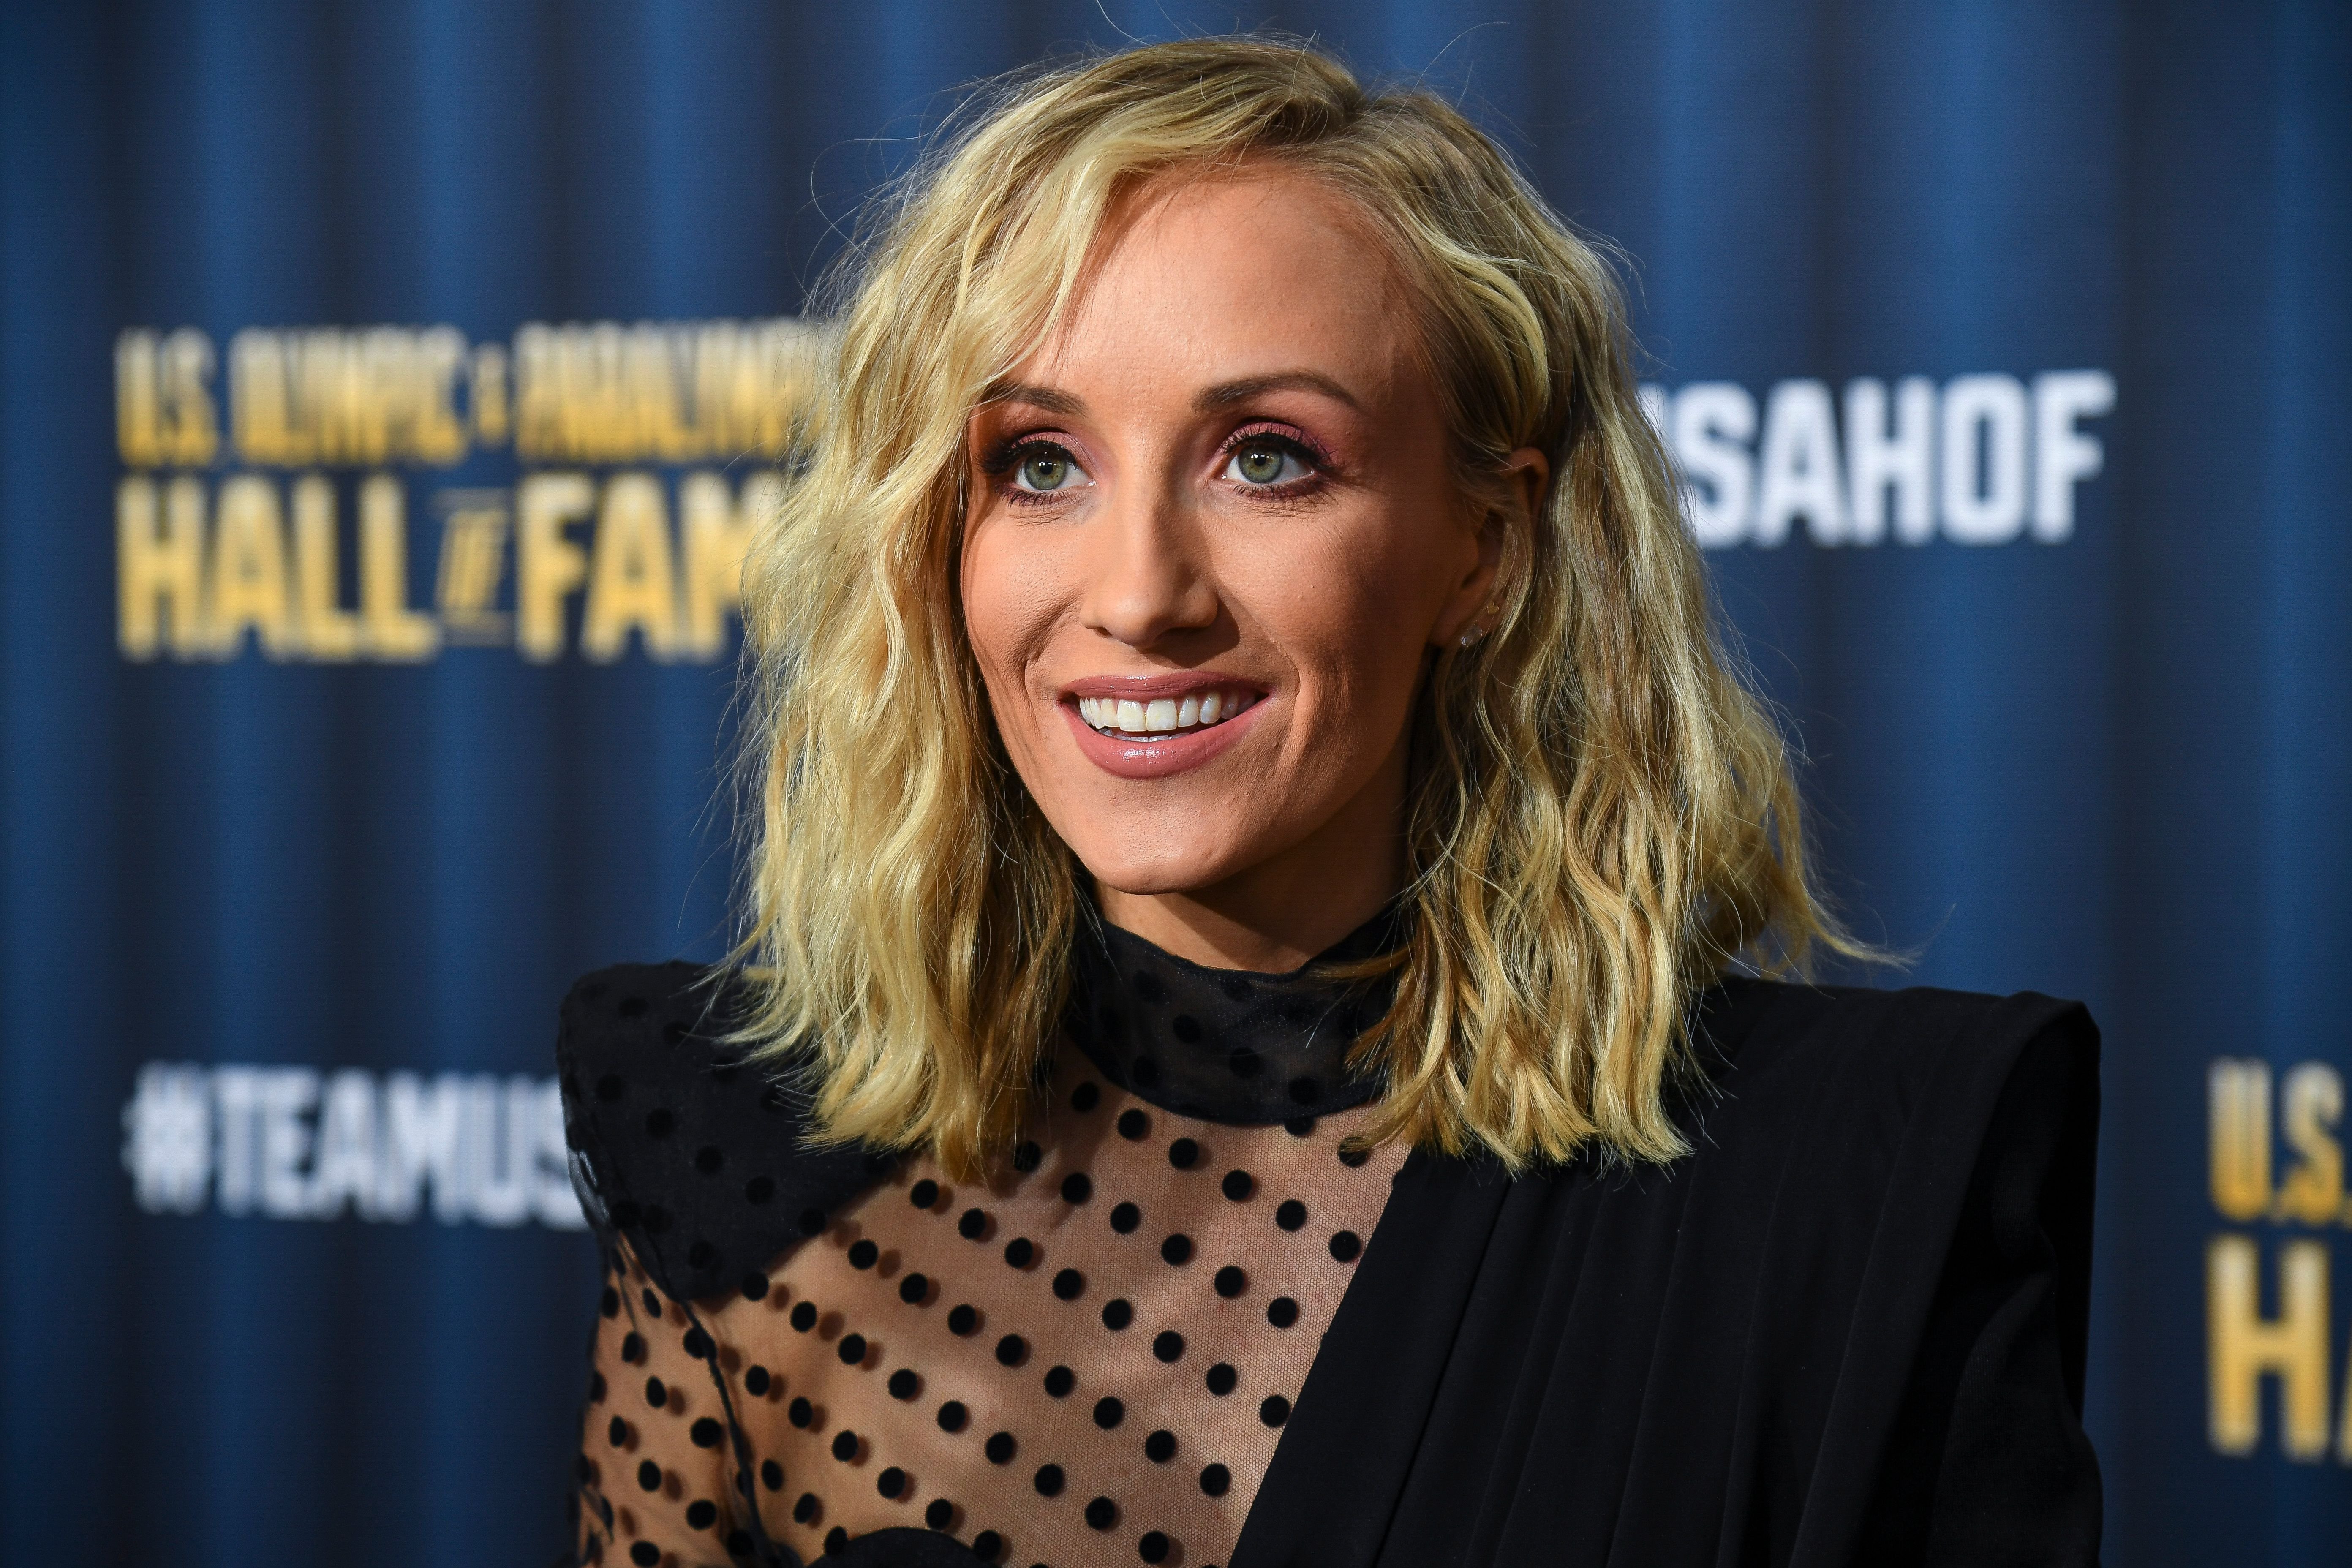 Nastia Liukin at the U.S. Olympic Hall of Fame Class of 2019 Induction Ceremony on November 1, 2019 | Photo: Getty Images